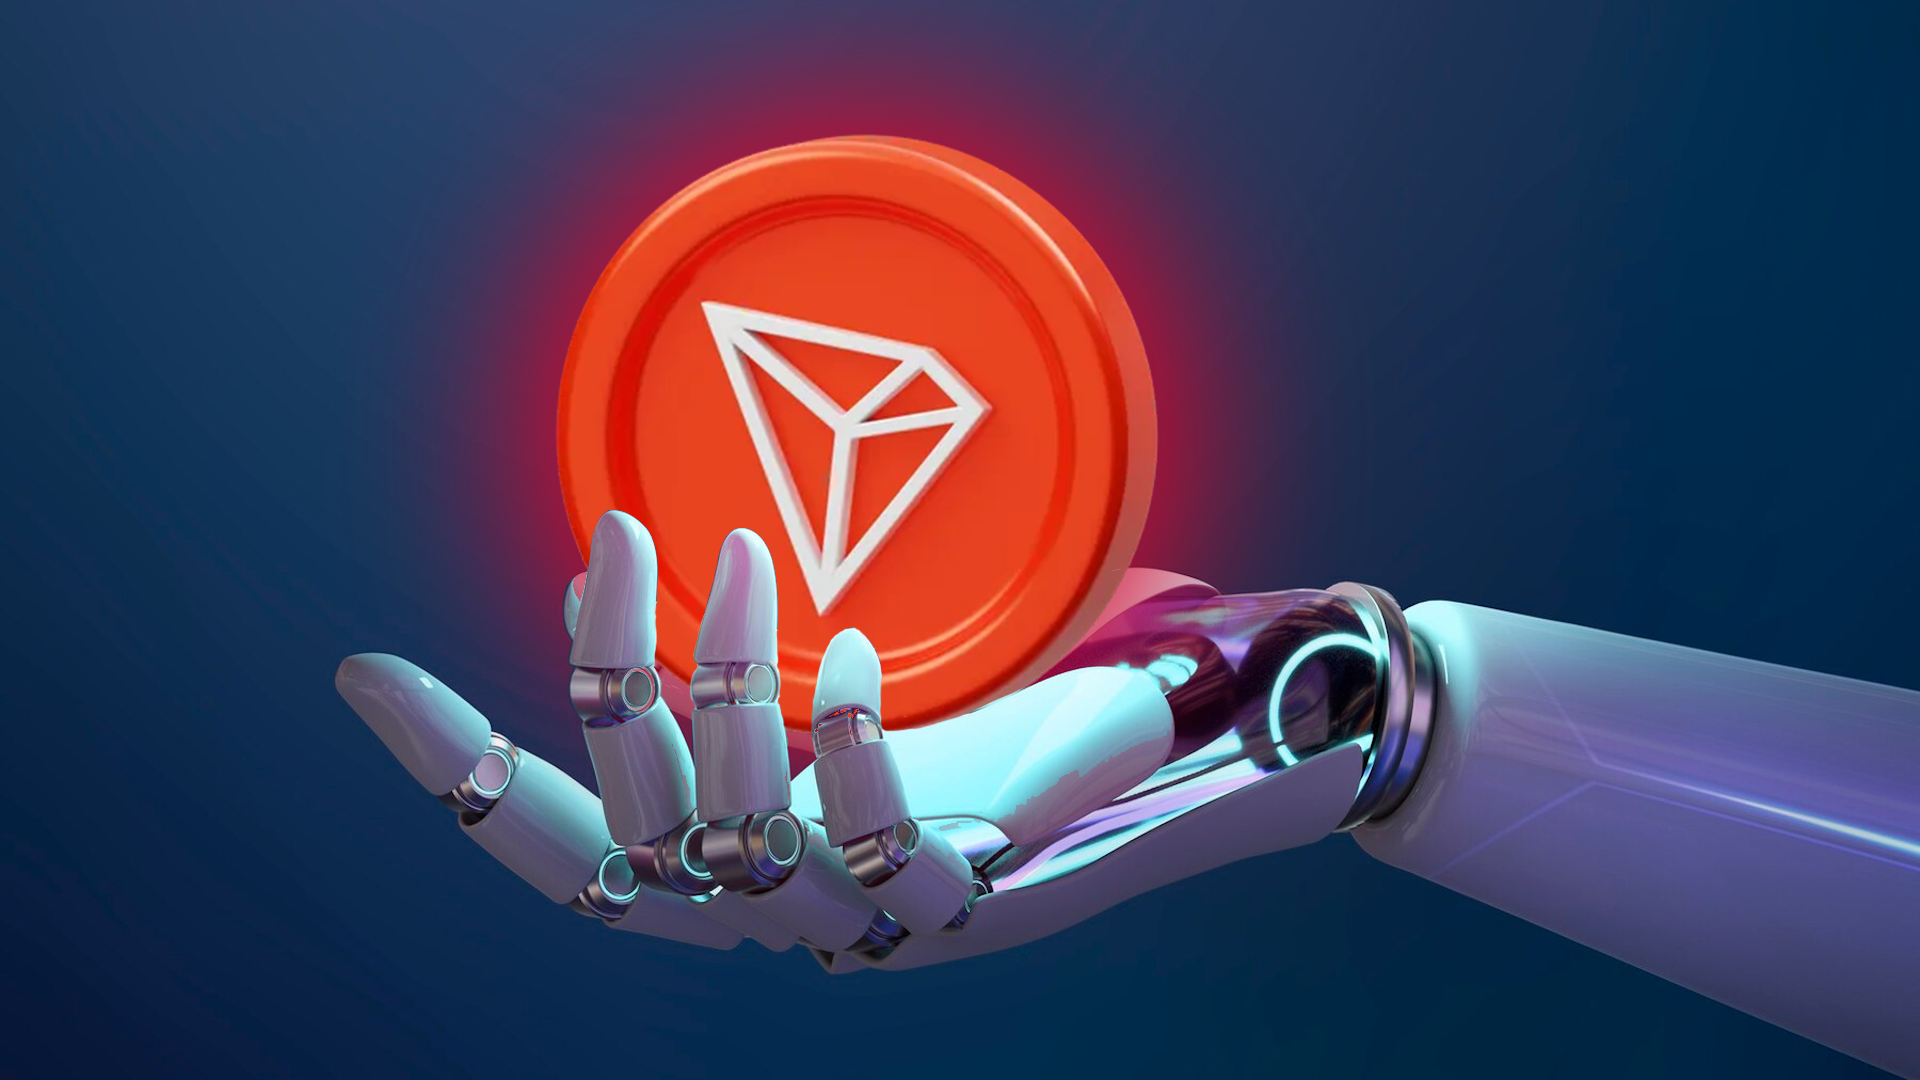 TRON Price Prediction up to $ by - TRX Forecast - 